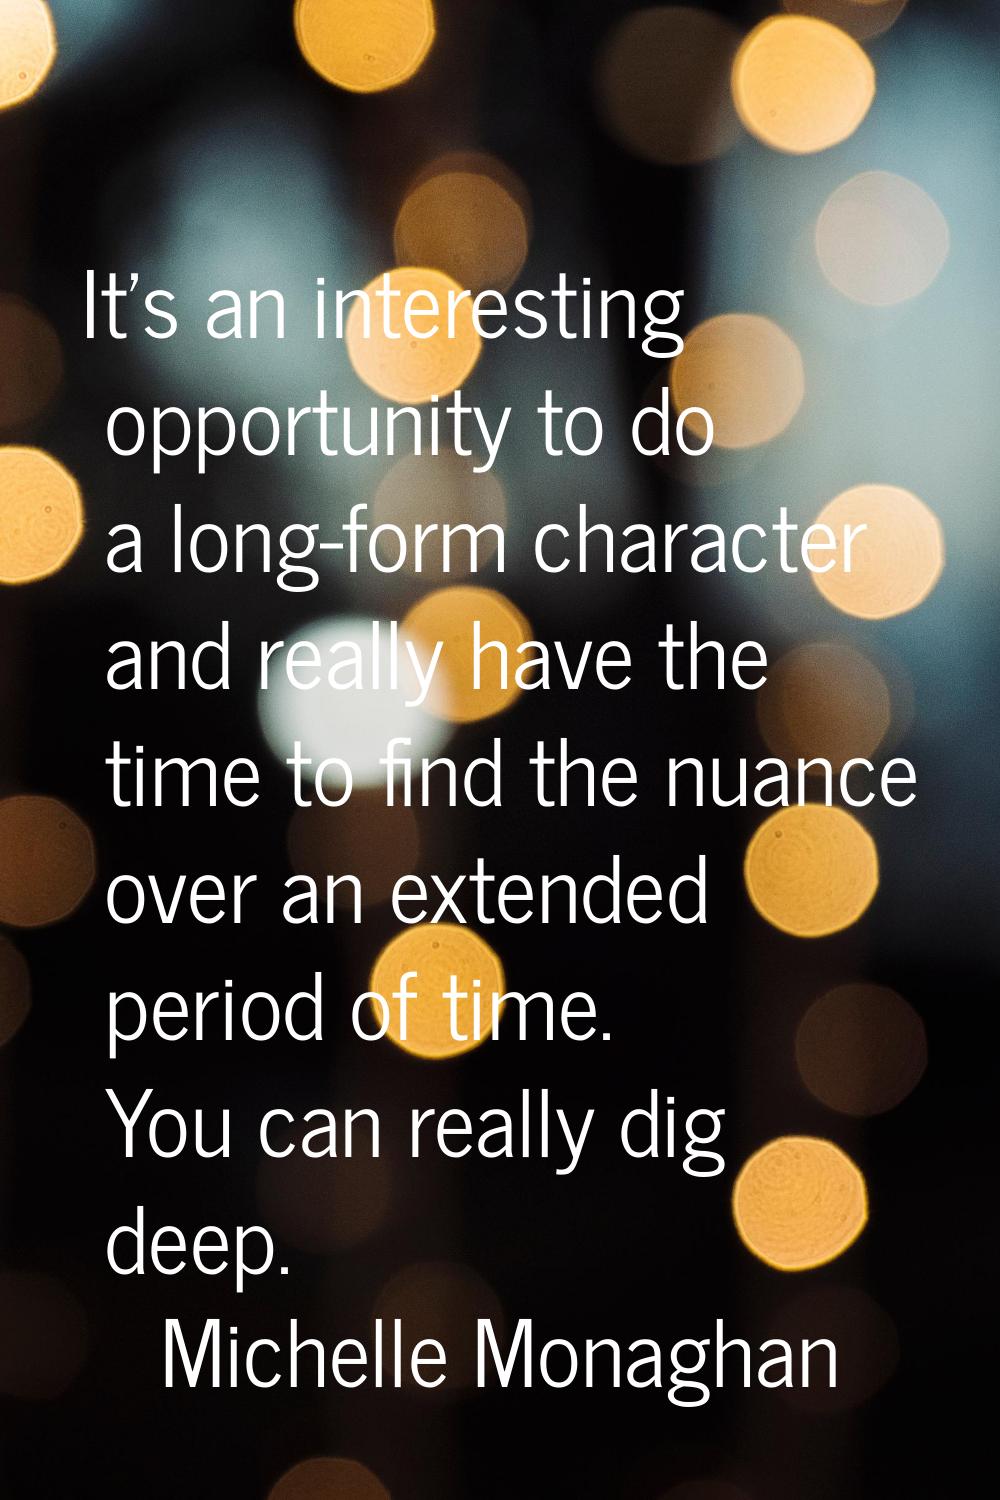 It's an interesting opportunity to do a long-form character and really have the time to find the nu